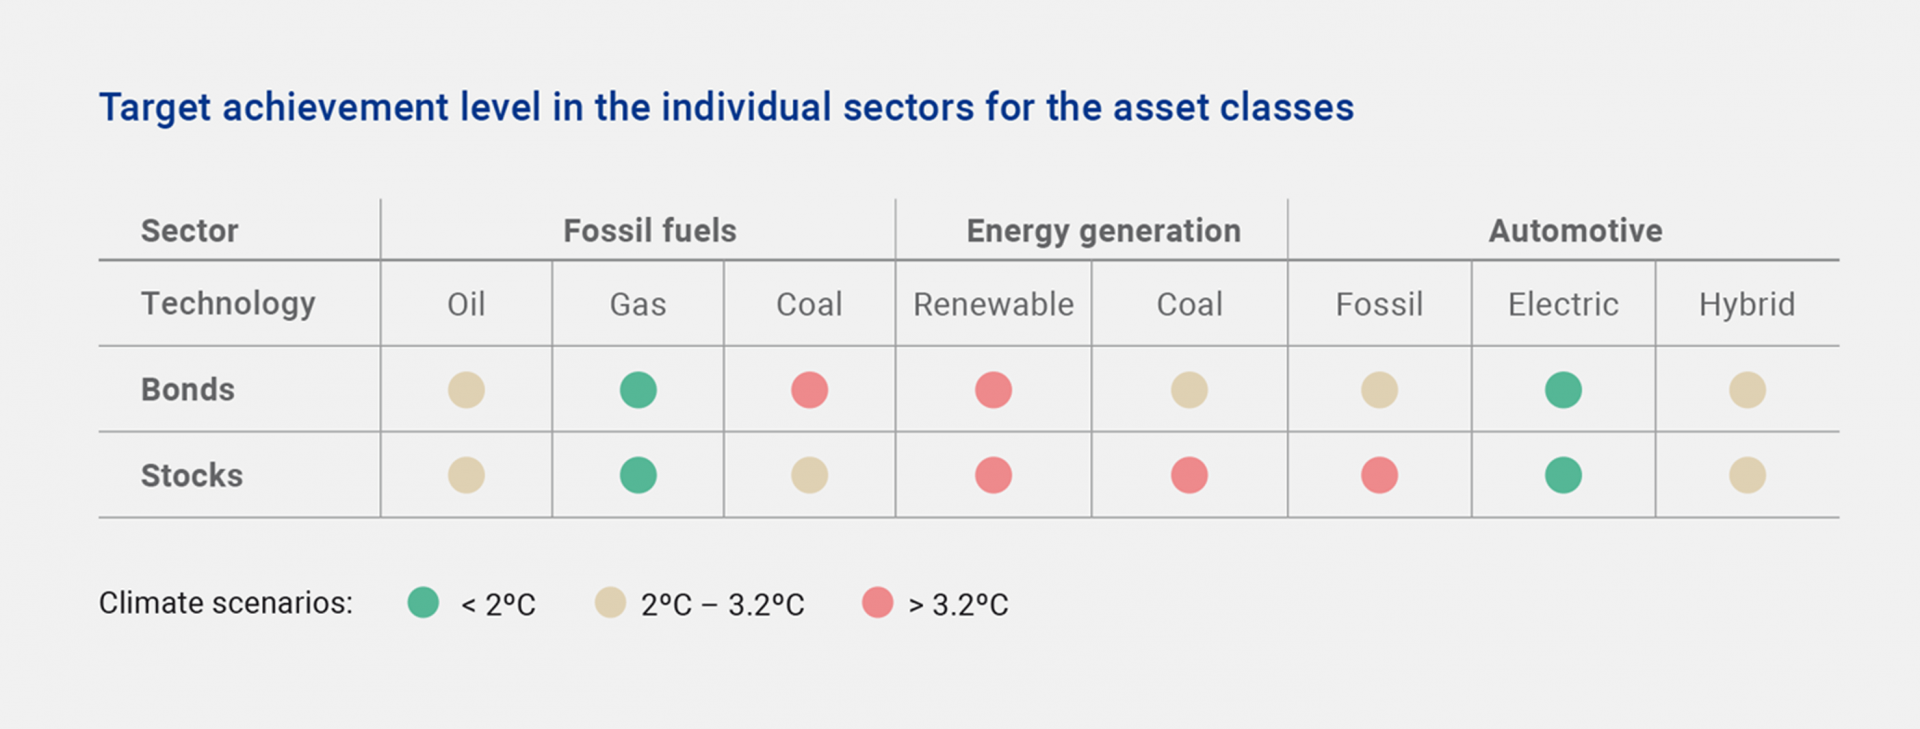 Target achievement level in the individual sectors for the asset classes